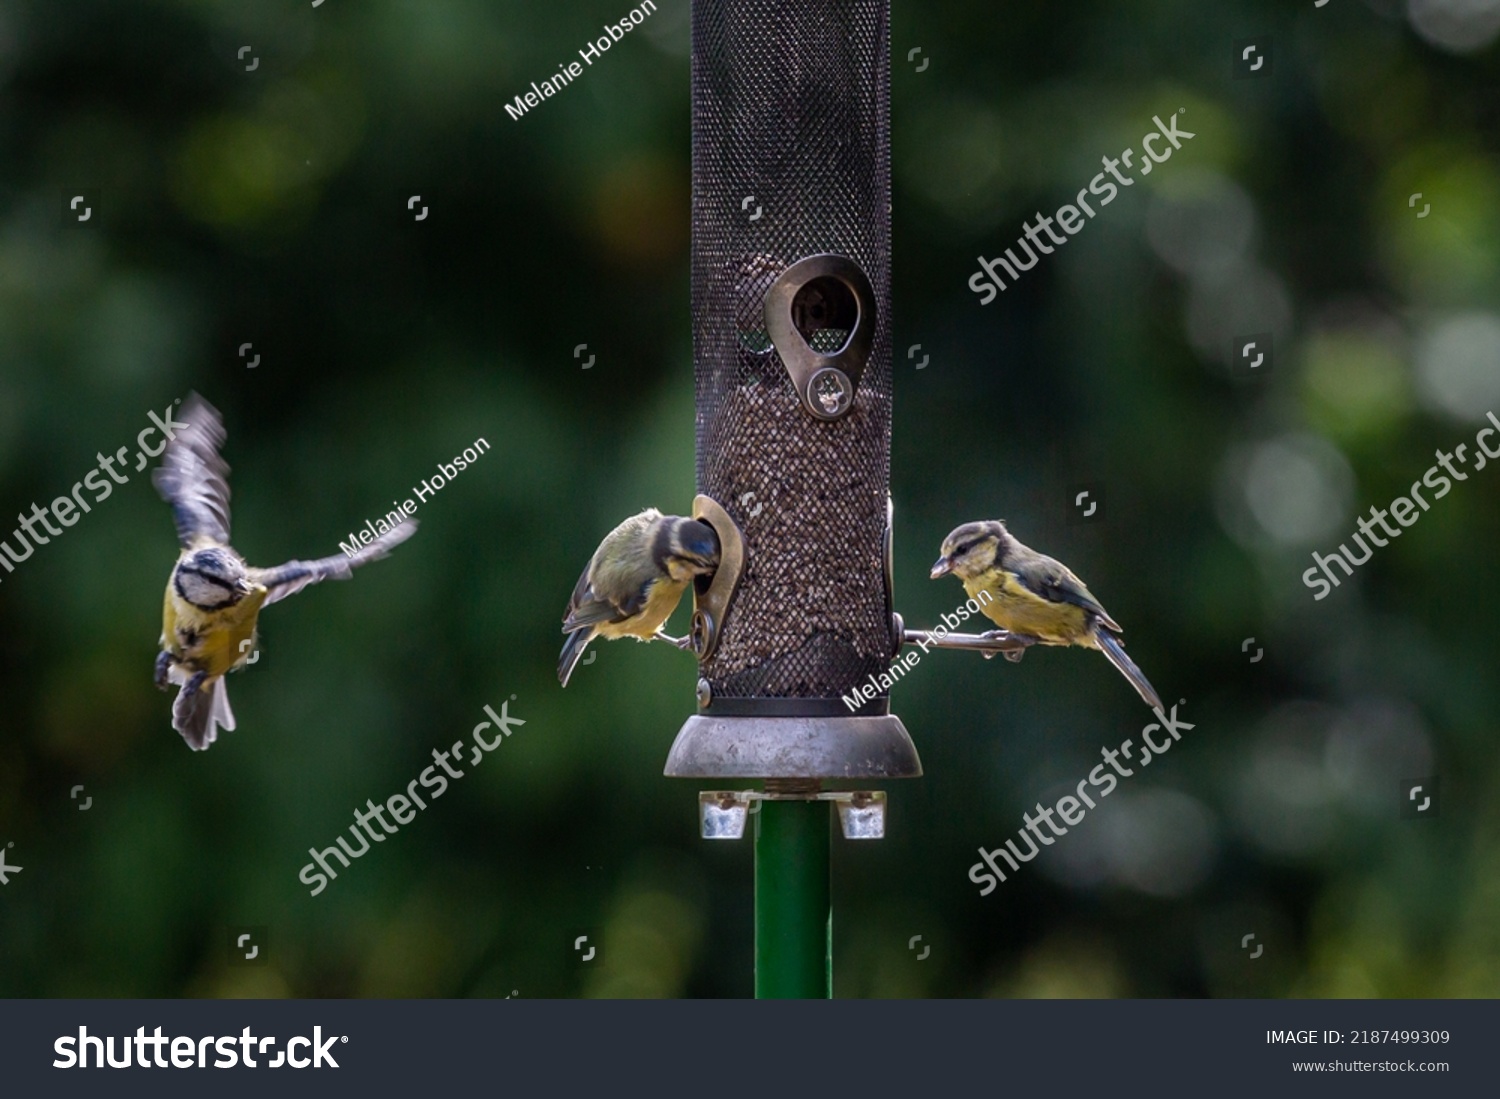 Two blue tits perched on a bird feeder with another in flight nearby, with a shallow depth of field #2187499309